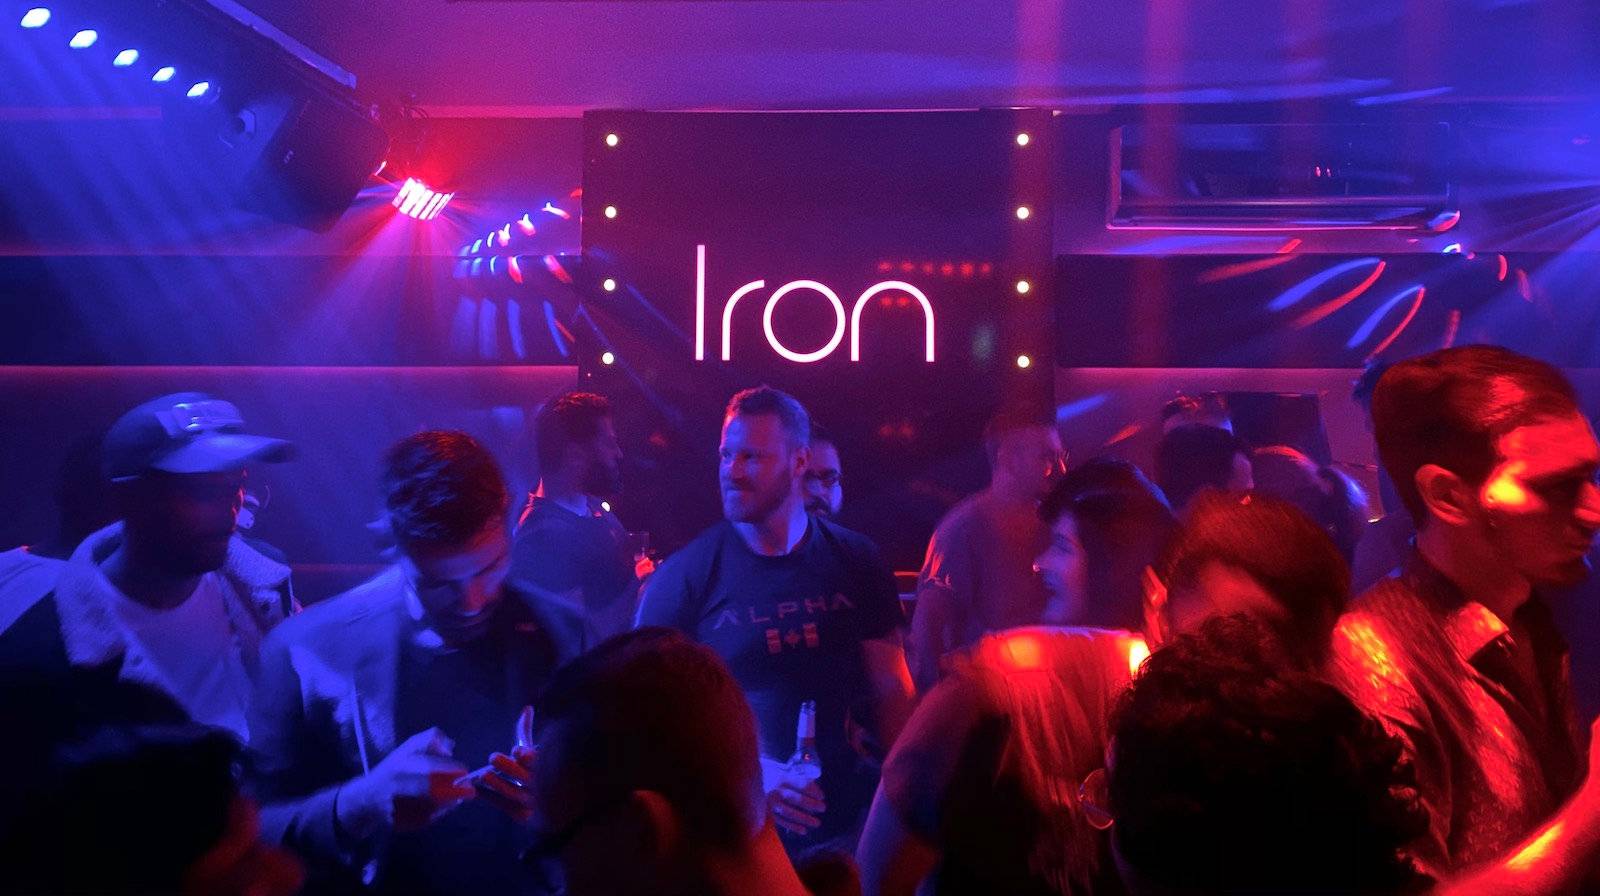 Another one of our favourite gay bars in Cologne is IRON, but there are so many to choose from!